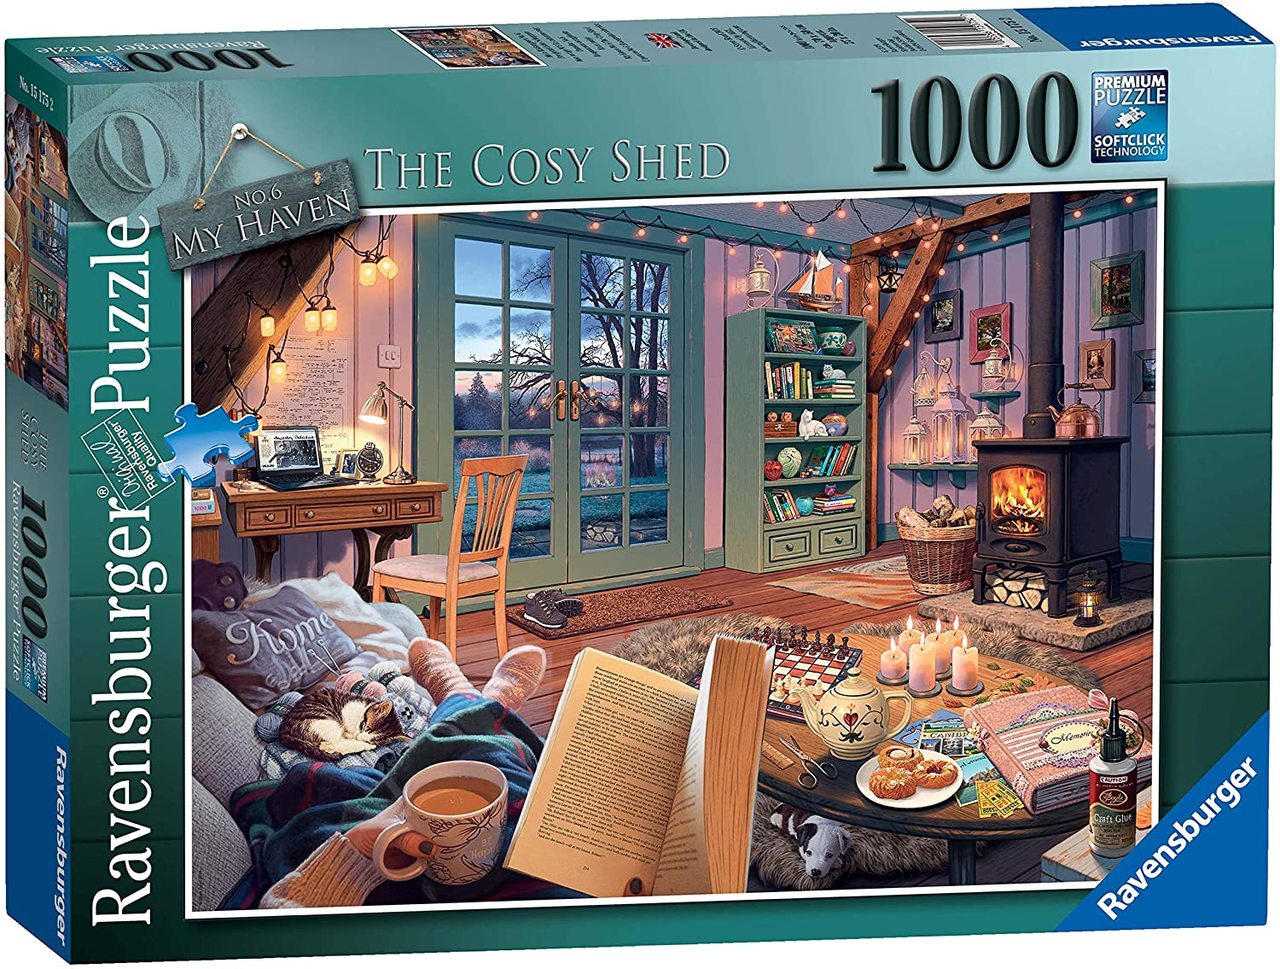 My Haven: No 6. The Cosy Shed (1000 pc puzzle)